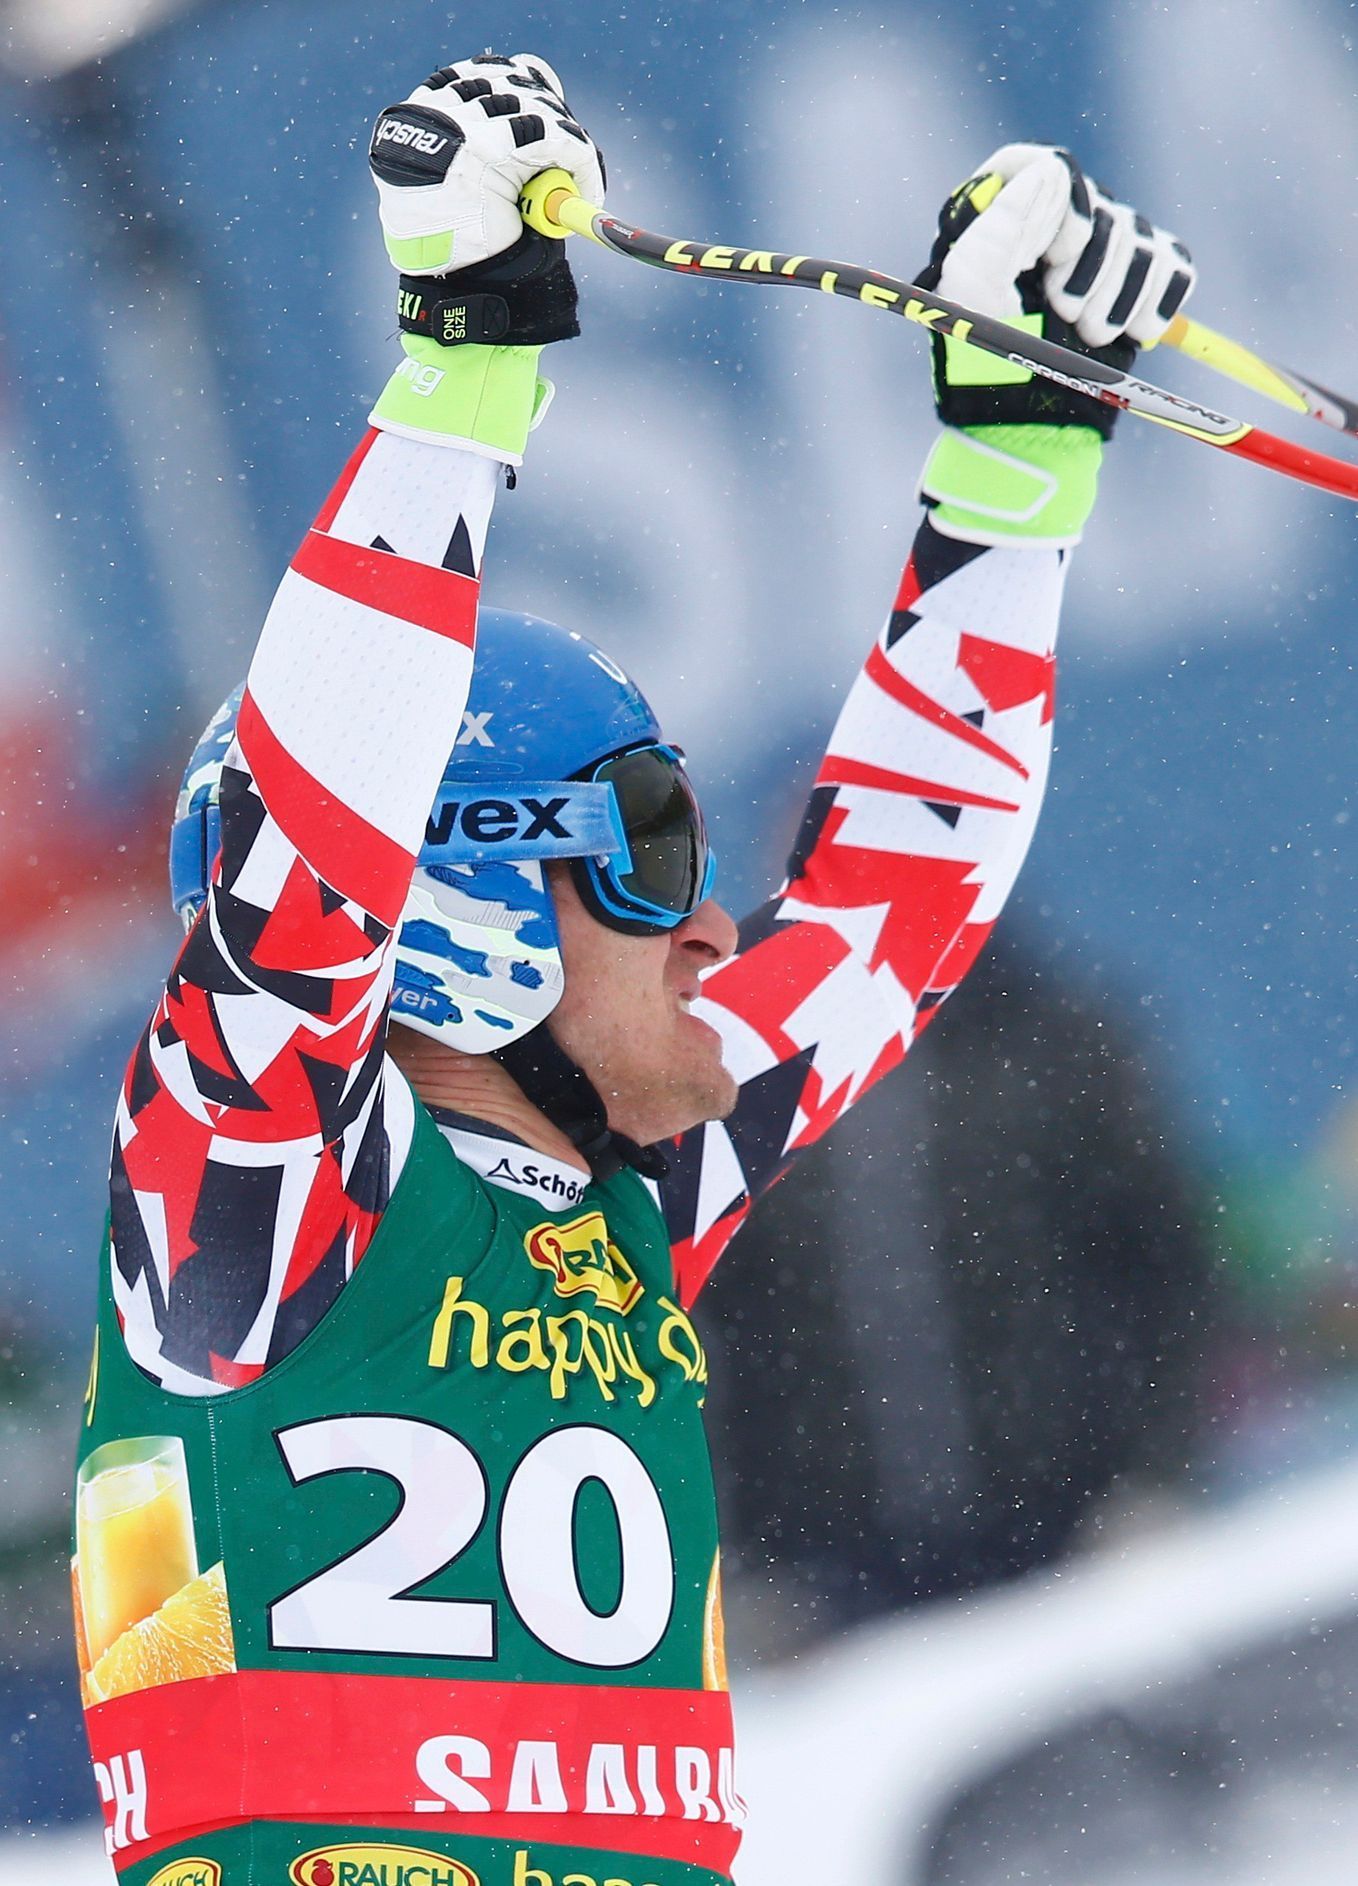 Mayer of Austria reacts in the finish area during the men's Super G of the Alpine Skiing World Cup in Saalbach